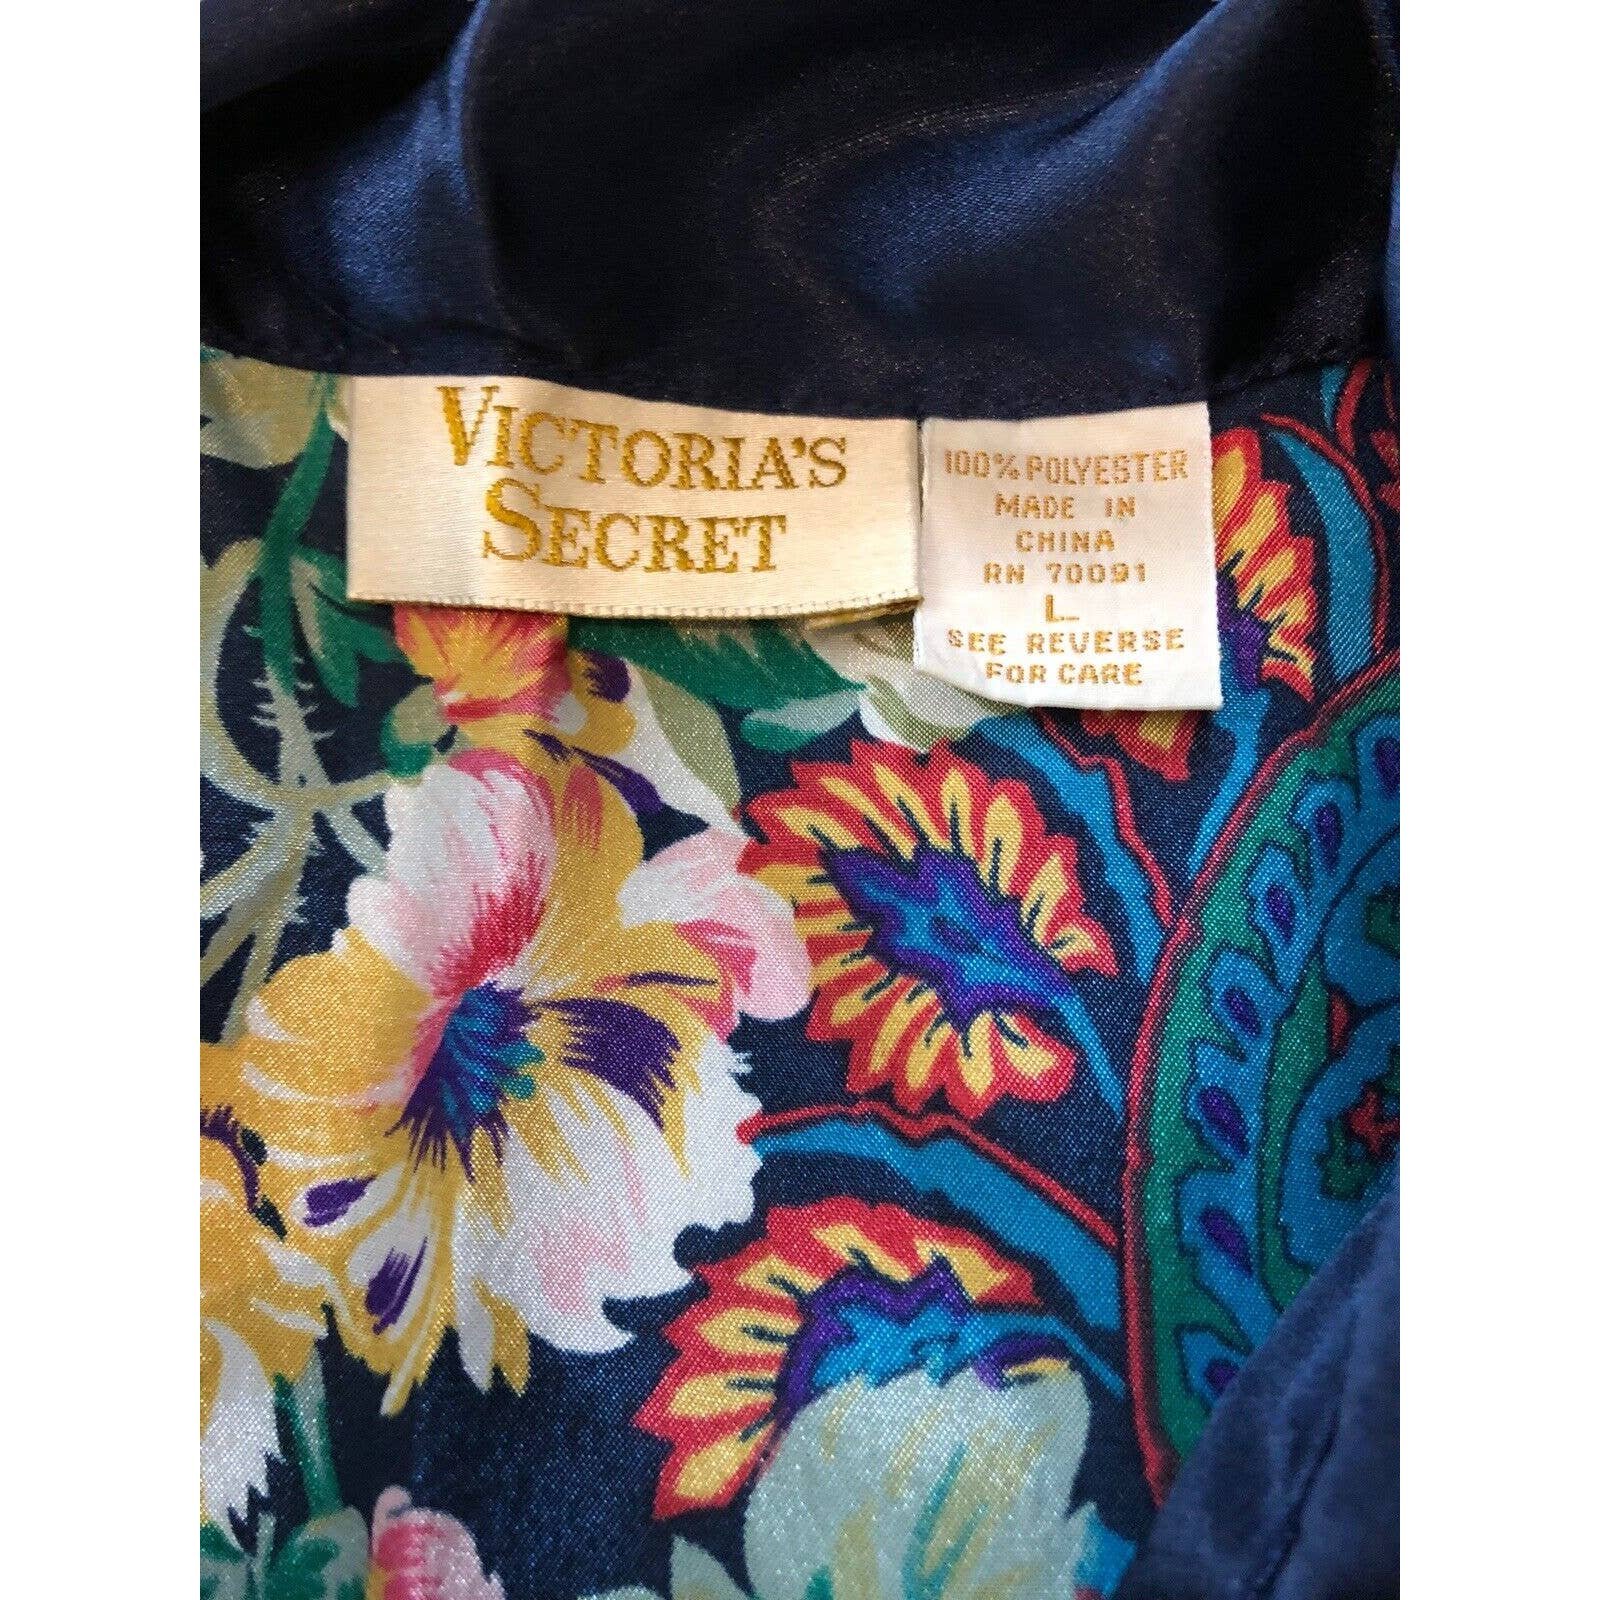 Exclusive Victorias Secret Gold Label Nightgown Sleep Shirt Large Silky Blue Floral Vtg m4pCaxoa3 Fashion